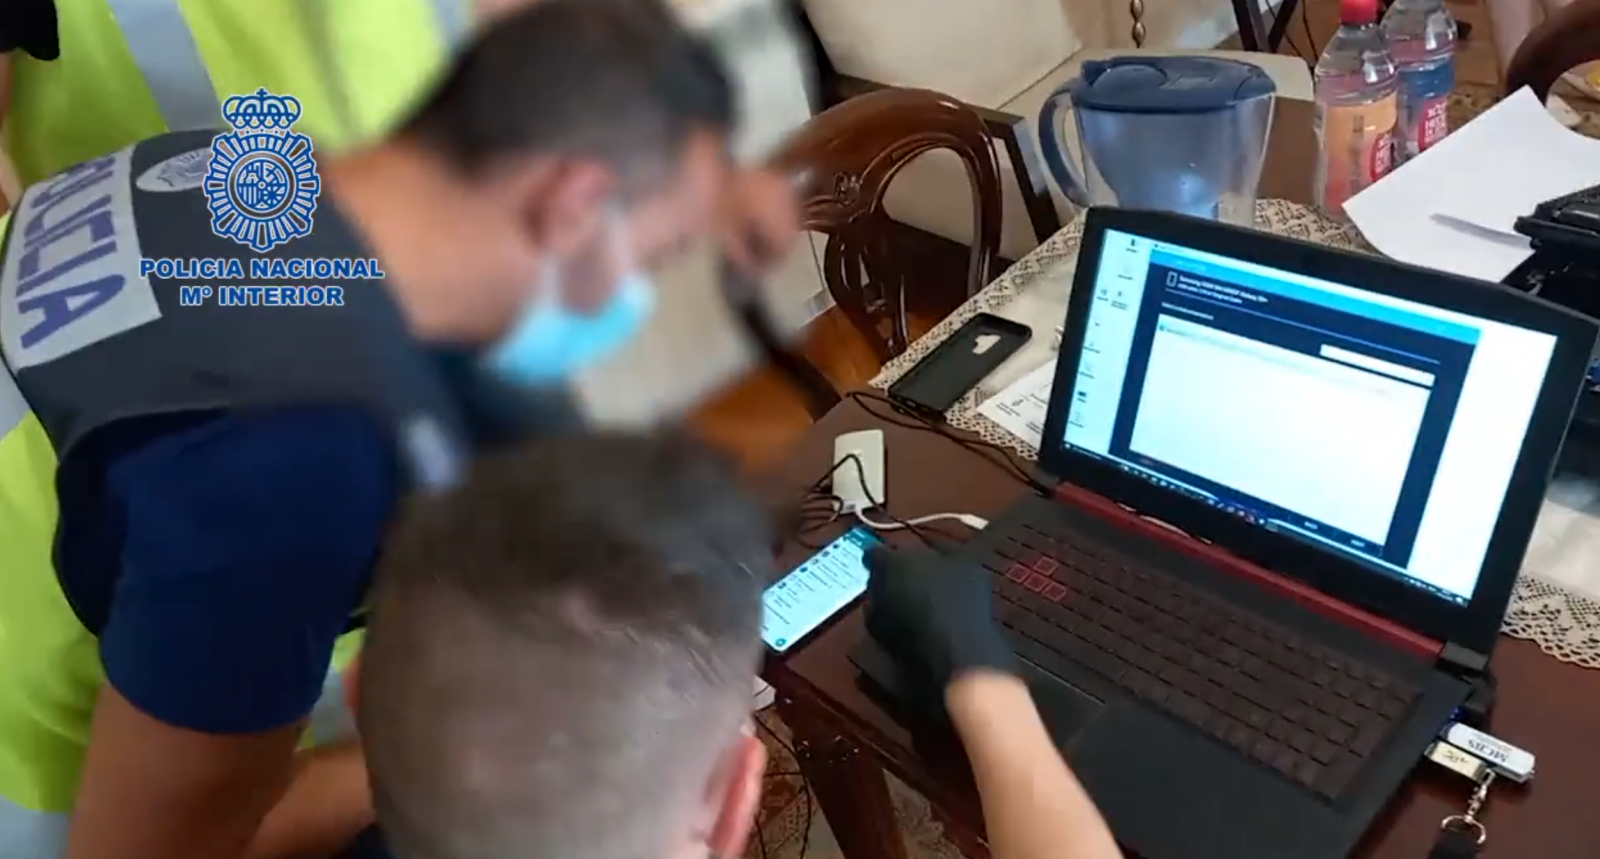 Spanish police officers collecting evidence from confiscated devices 